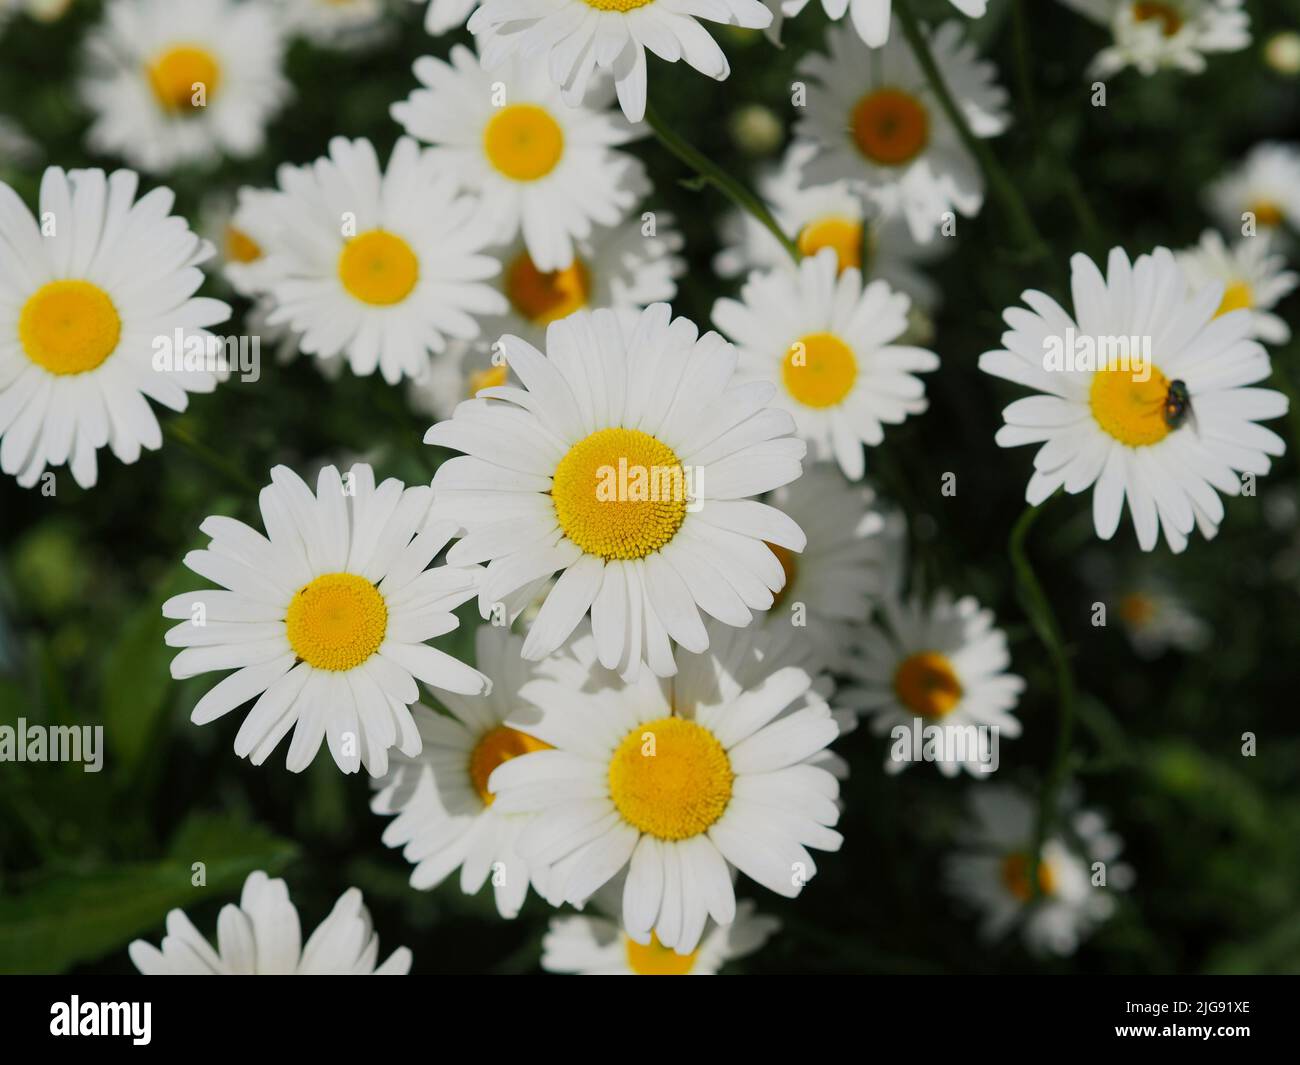 Hard to beat the simple pleasure of a clump of daisy (Leucanthemum vulgare) in a garden in Ottawa, Ontario, Canada. Stock Photo